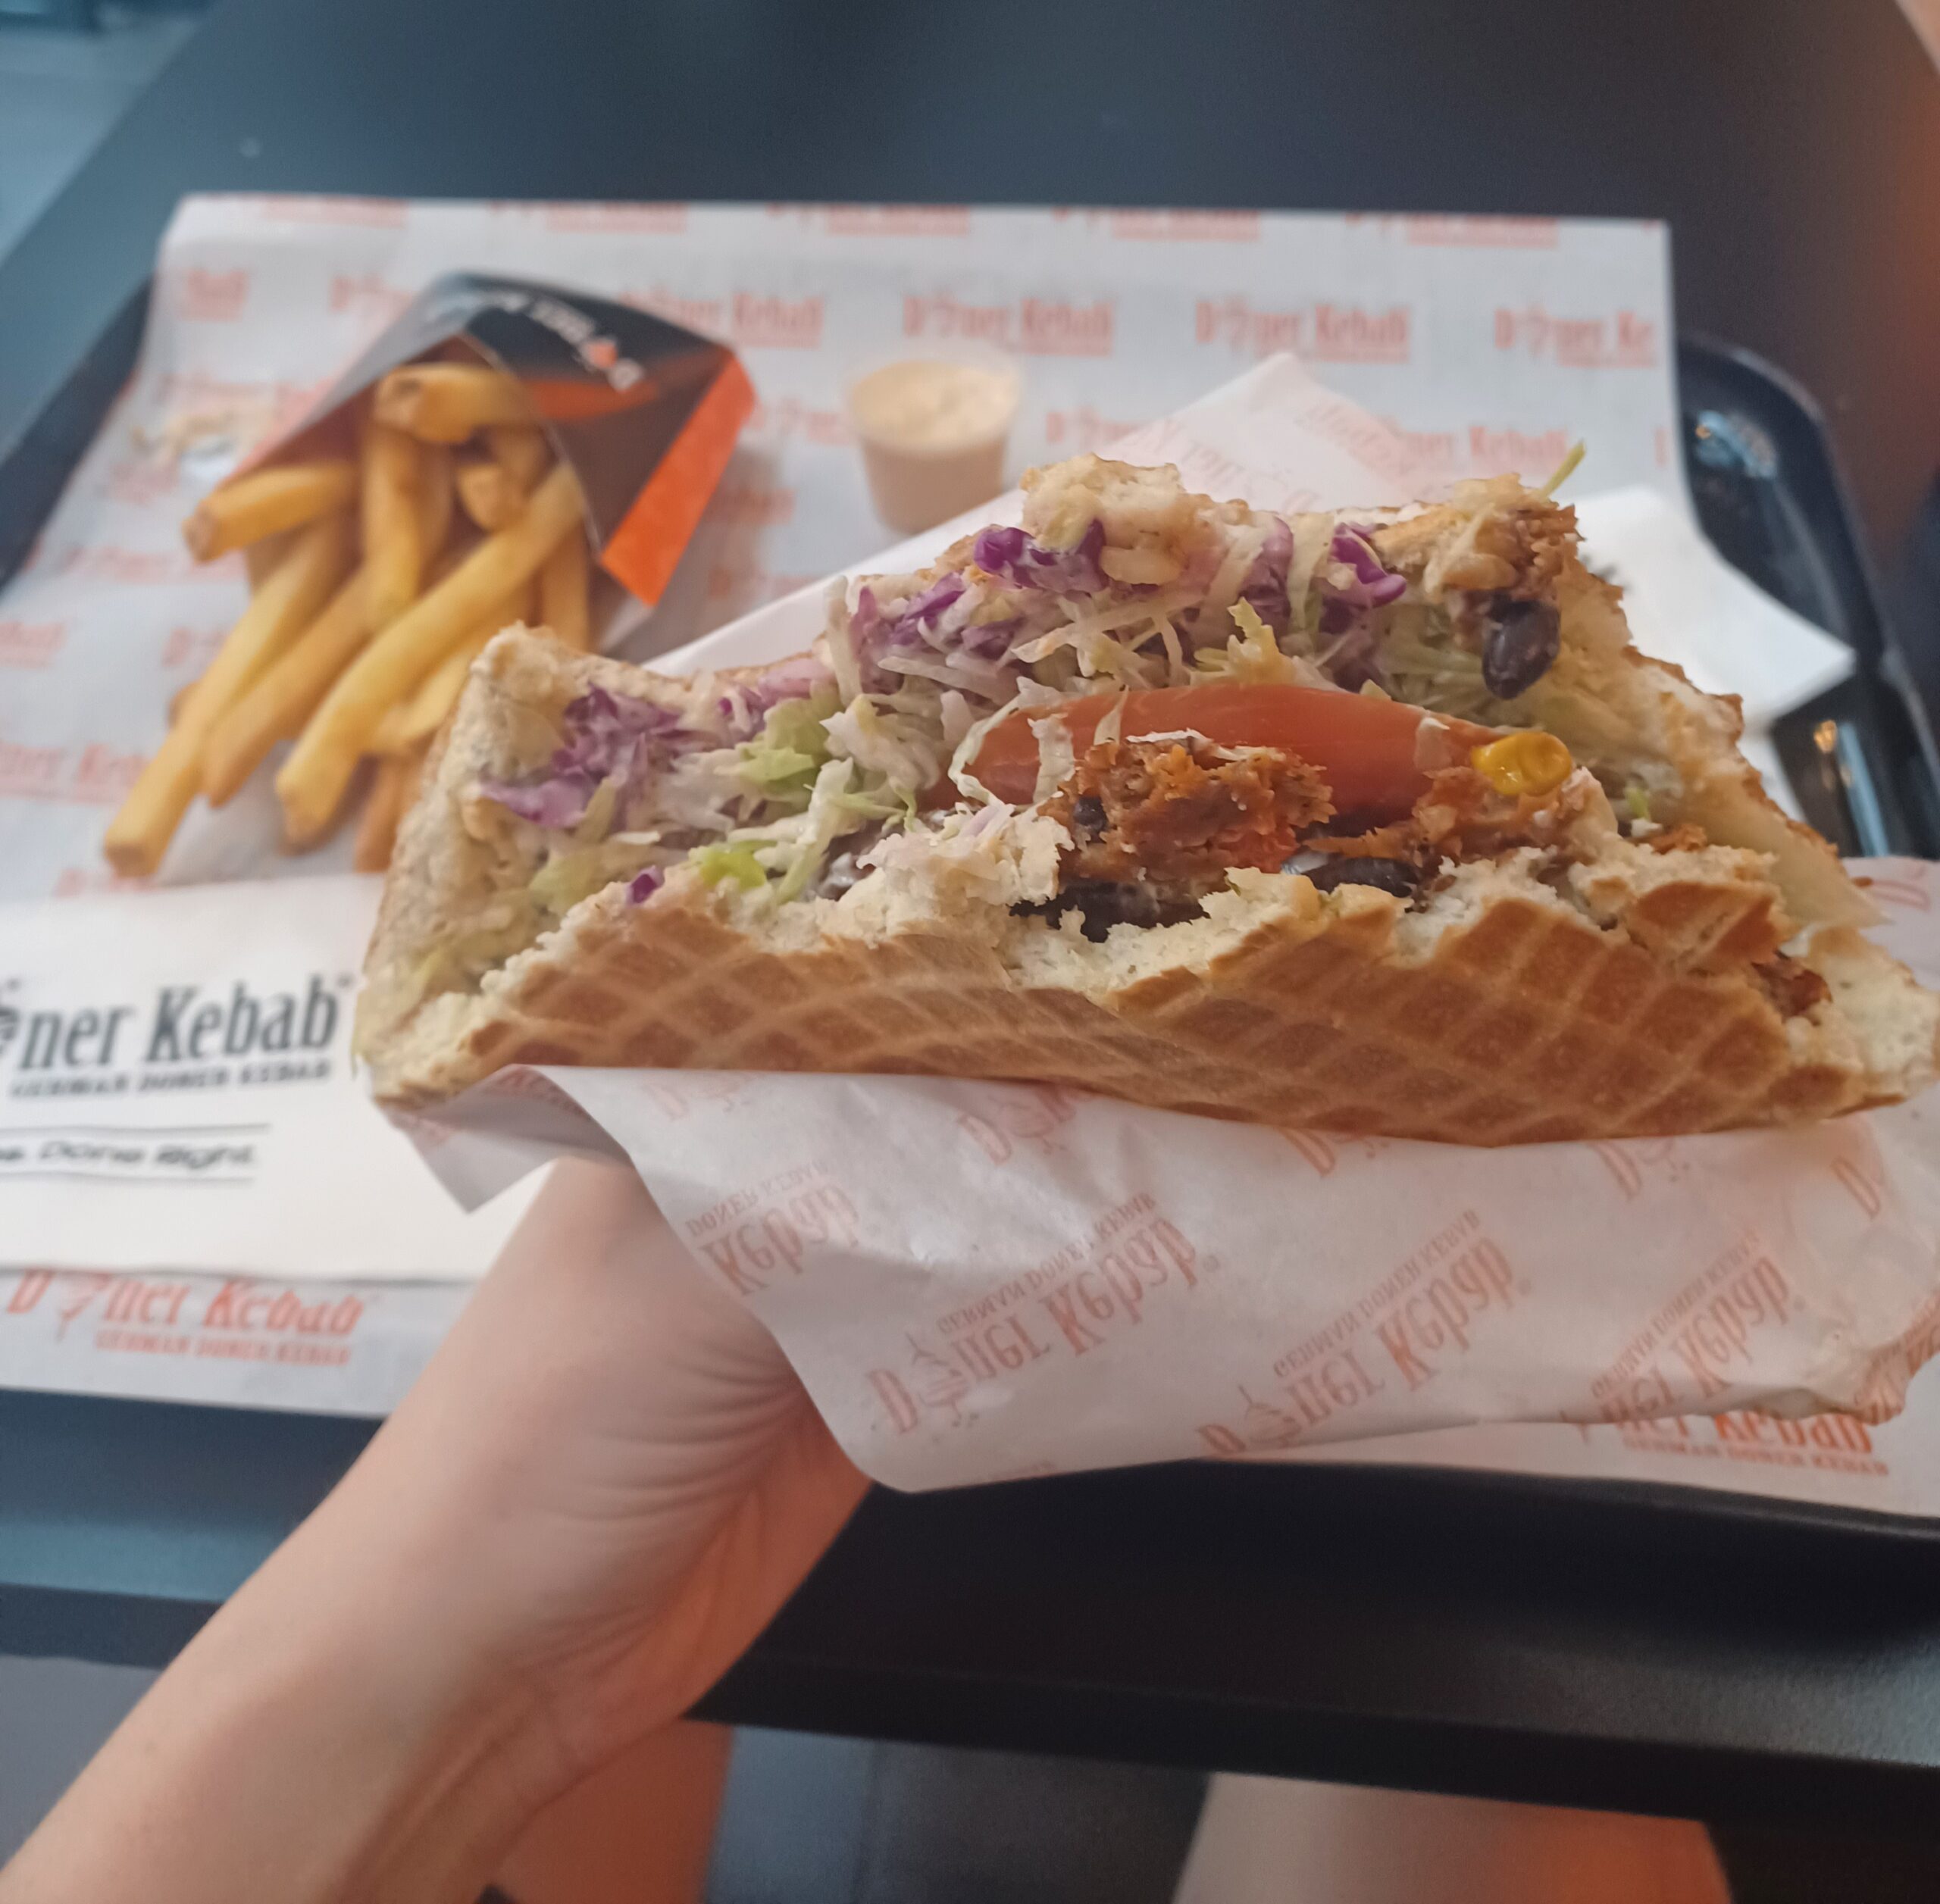 A triangular pita style bread filled with coleslaw, a veggie burger patty, tomato, red cabbage, and lettuce. A pack of fries is in the background.